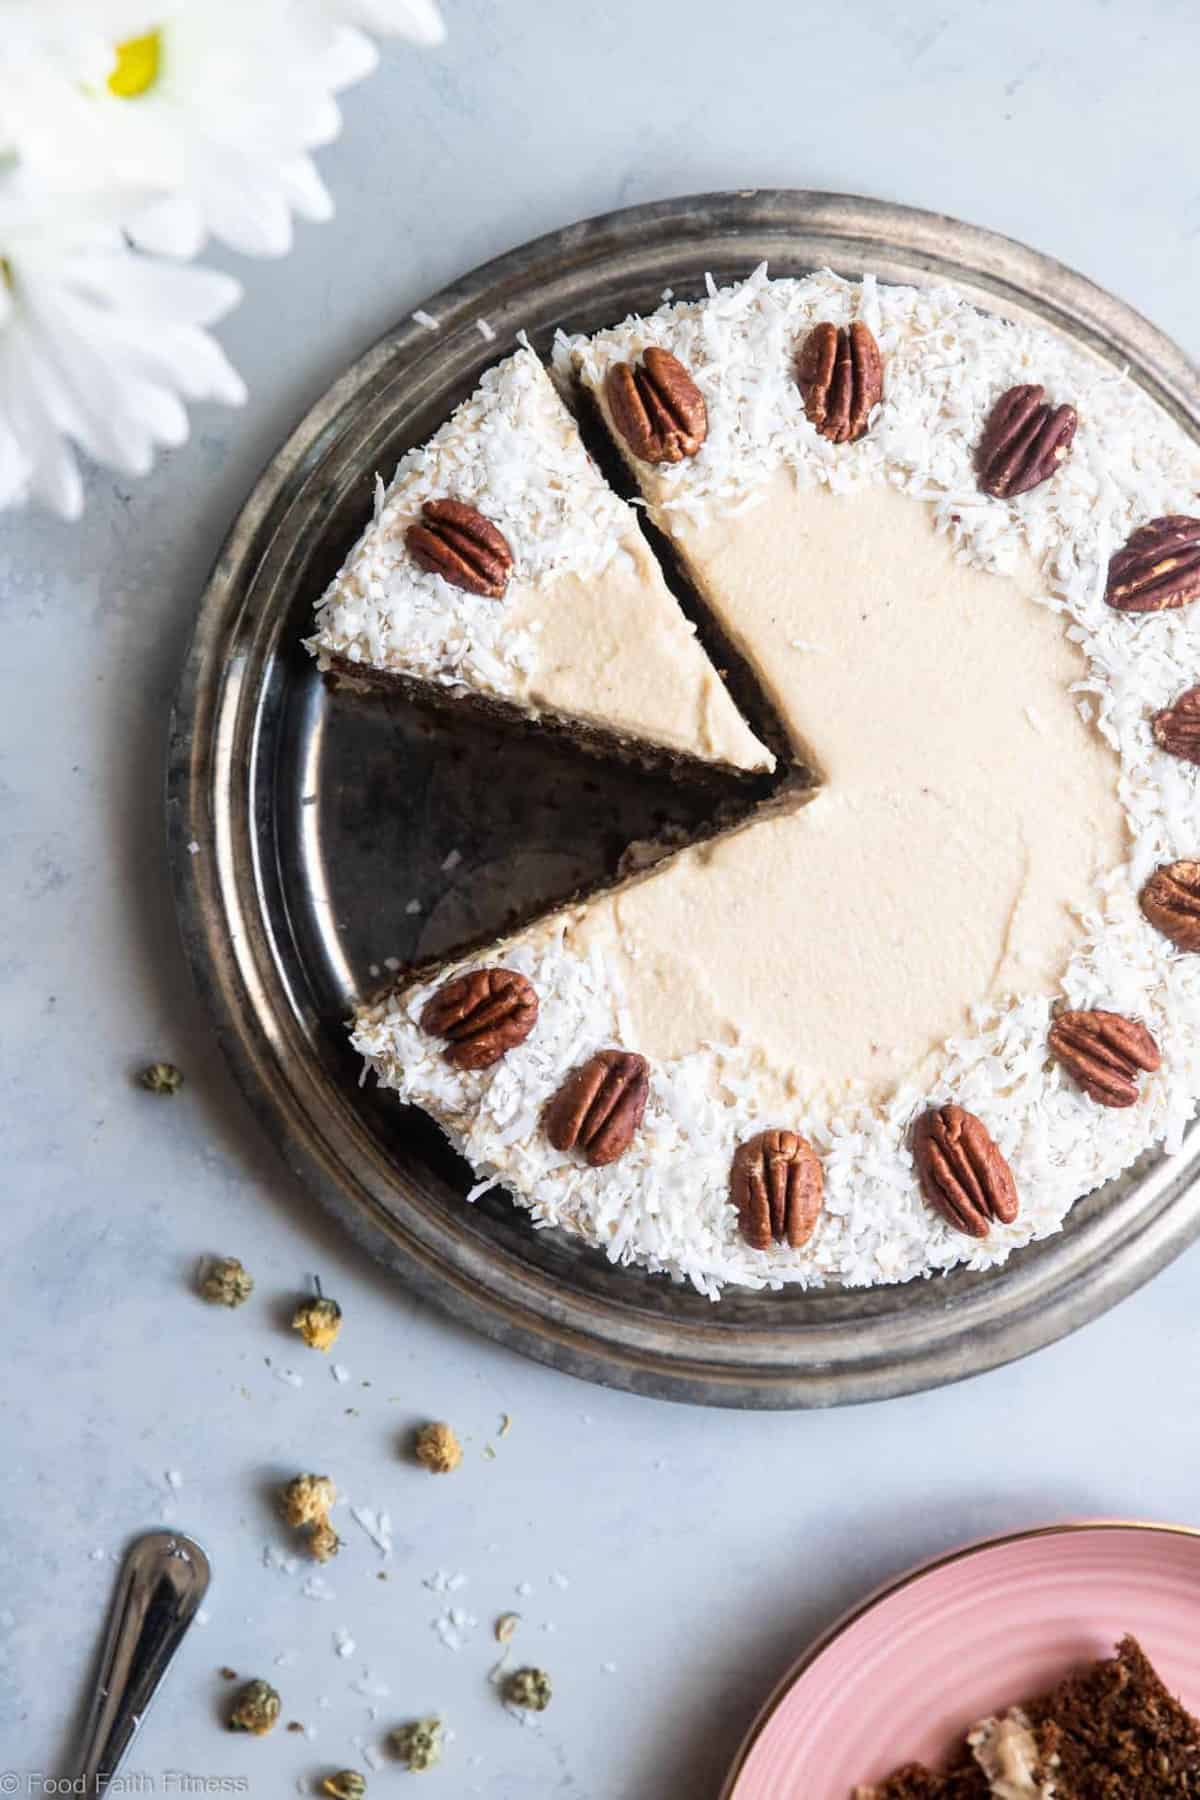 Paleo Carrot Cake - This dairy, grain and gluten free, Paleo Carrot Cake has a luscious cashew "cream cheese" frosting and is easy to make! Always a hit with a crowd! | #Foodfaithfitness | 